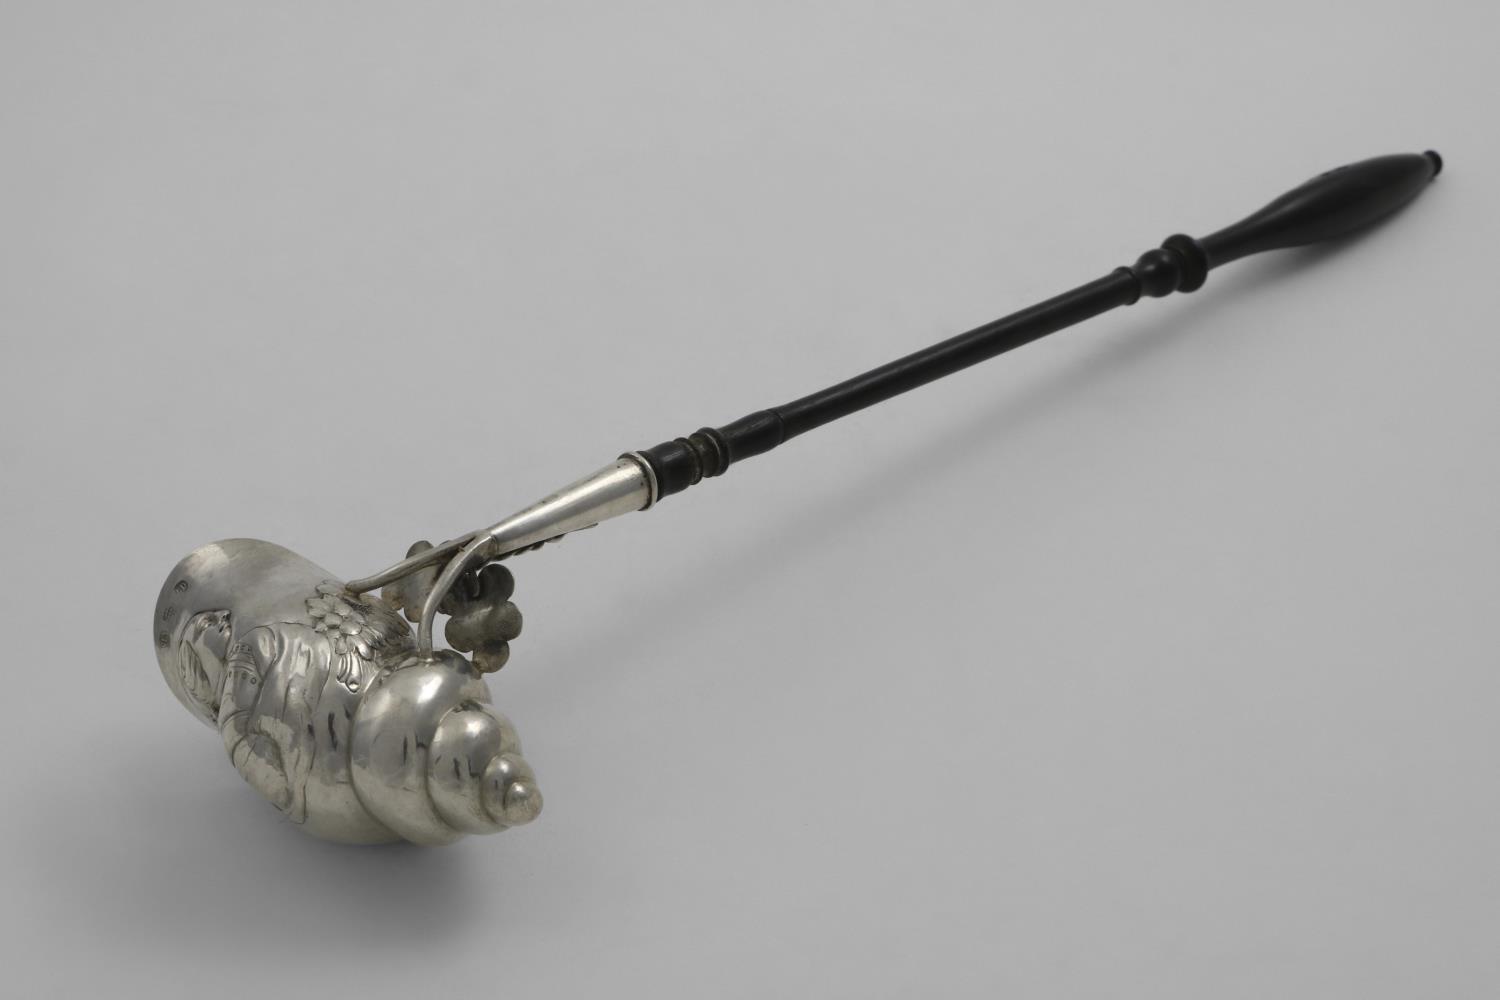 AN EARLY 19TH CENTURY NORWEGIAN PUNCH LADLE with an ebonised, turned wooden handle and an embossed